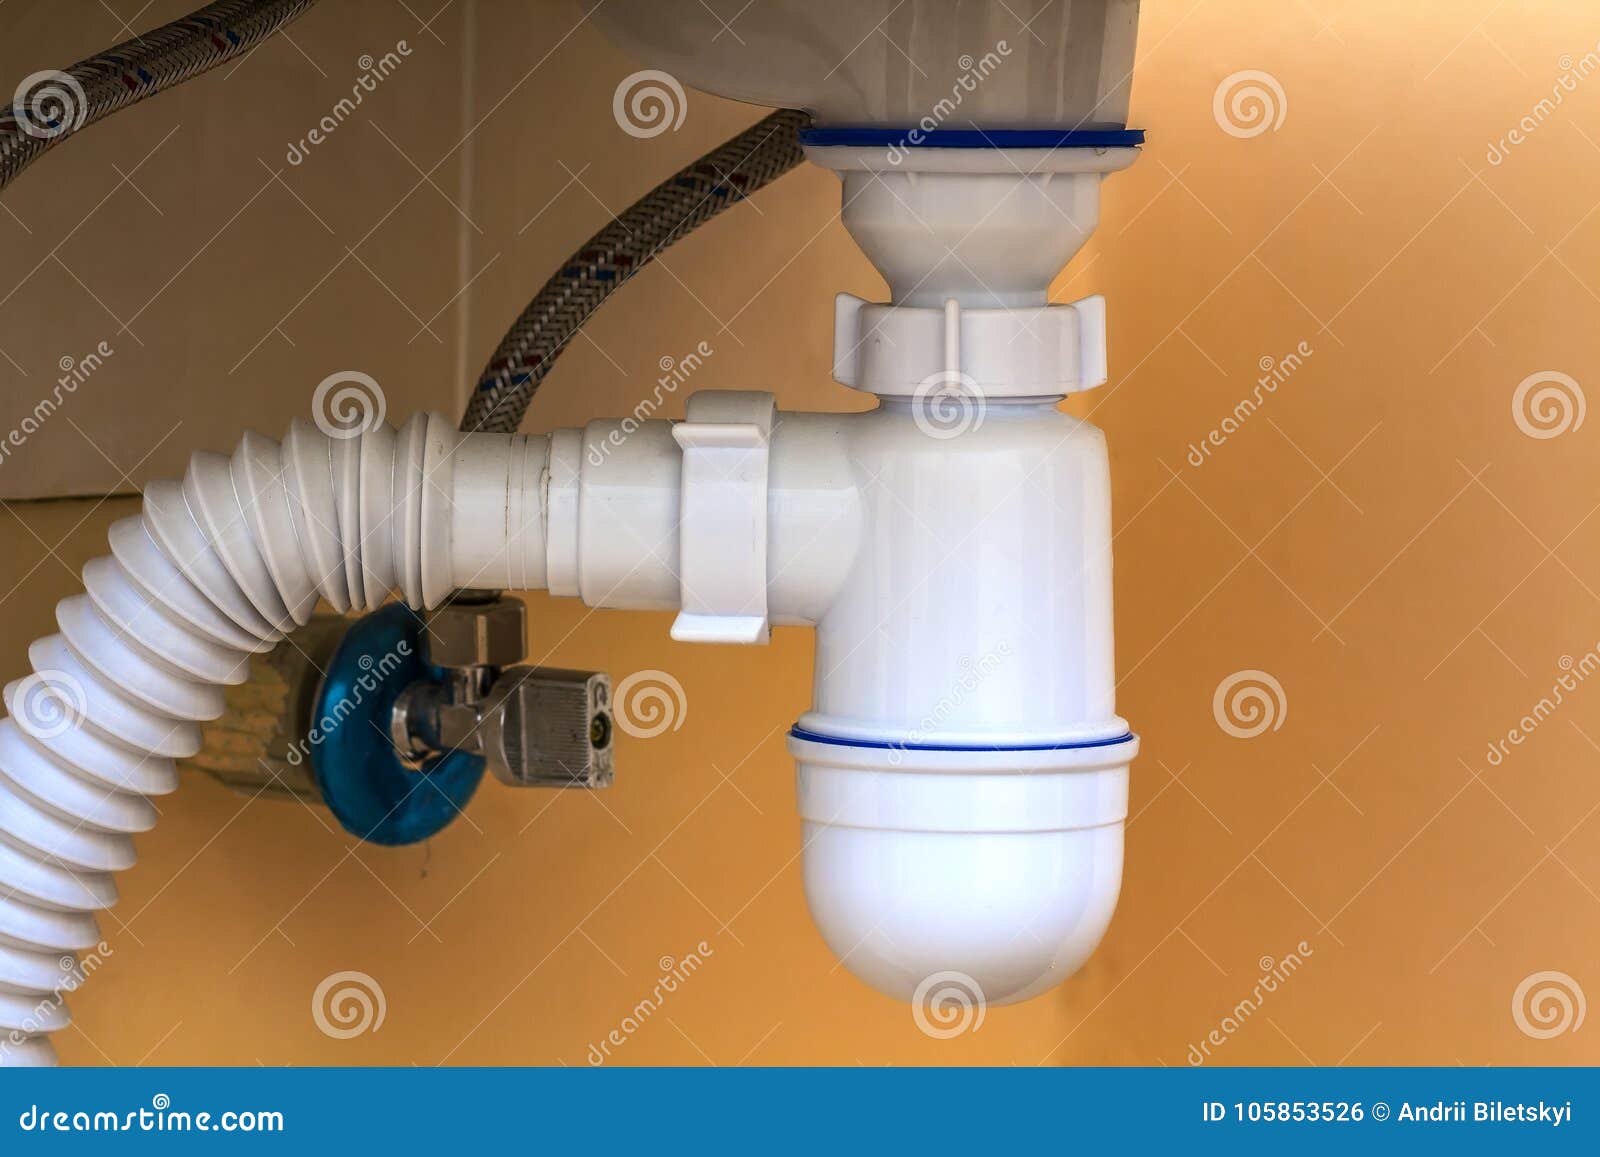 Sewer Drain Pipes Under The Kitchen Sink Plumbing Fixture